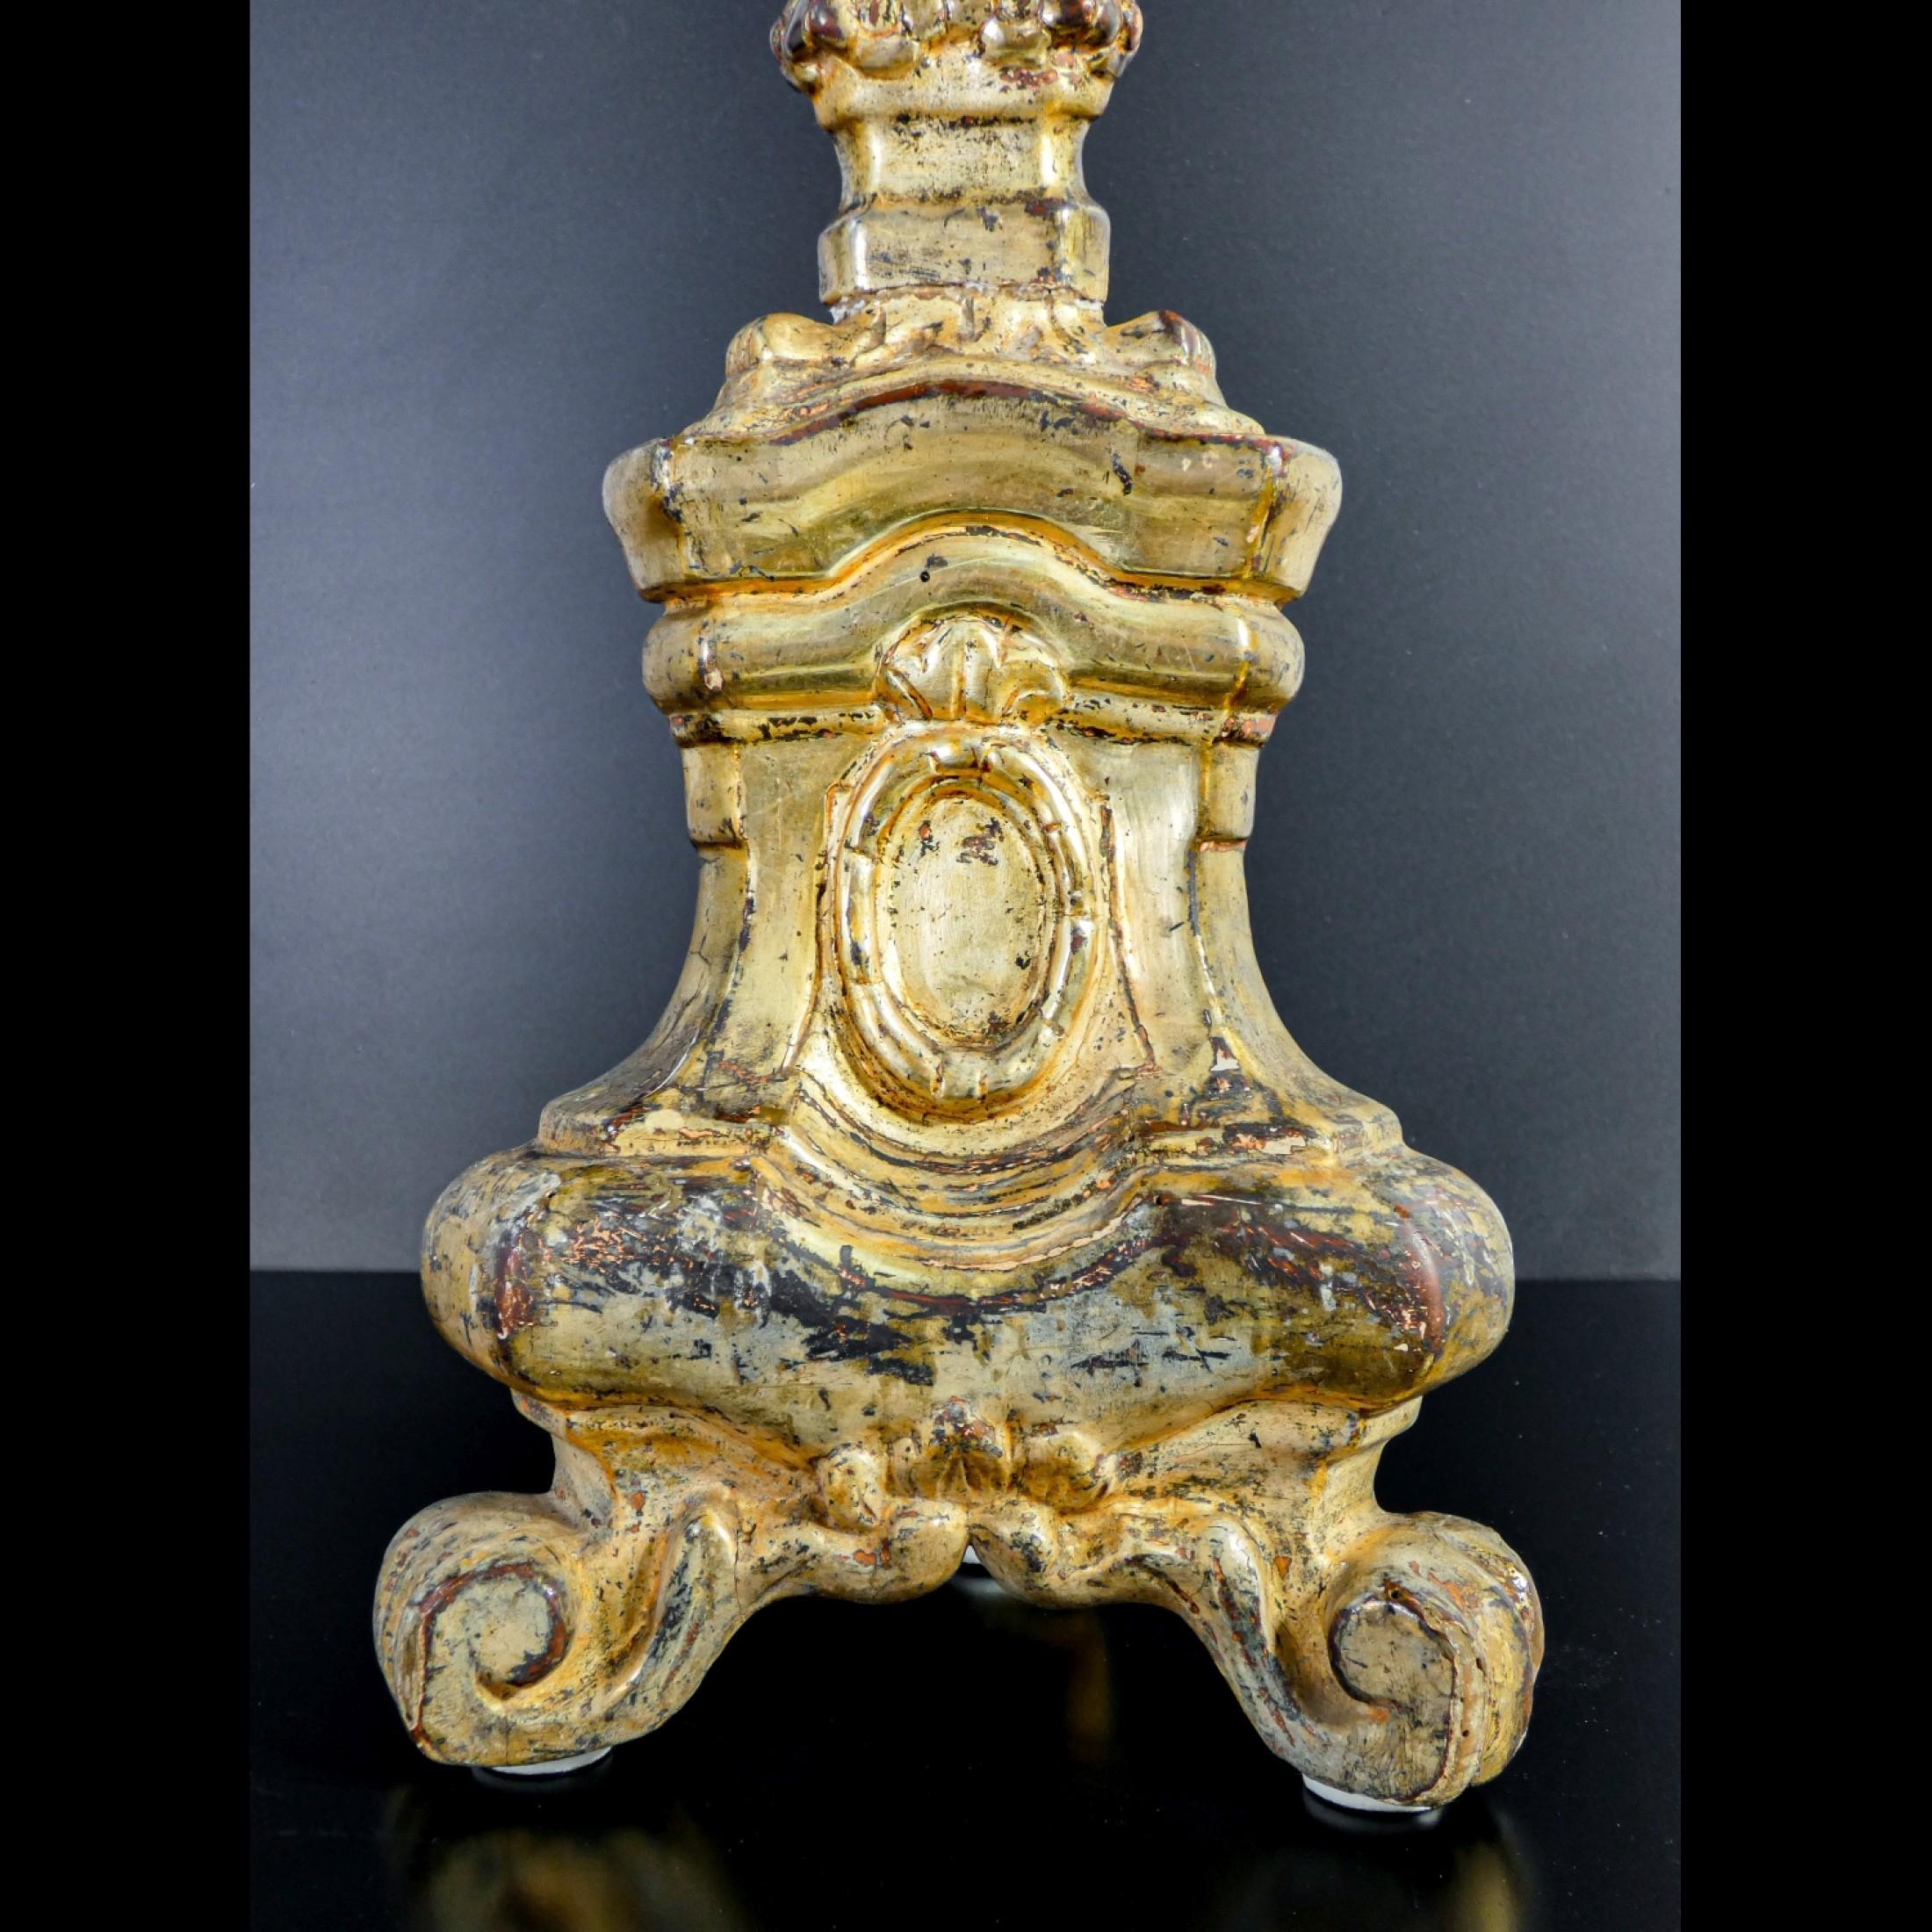 Italian Original Louis XVI Candlestick, in Carved Wood, 'Mecca' Gilded, Italy, 1770-1780